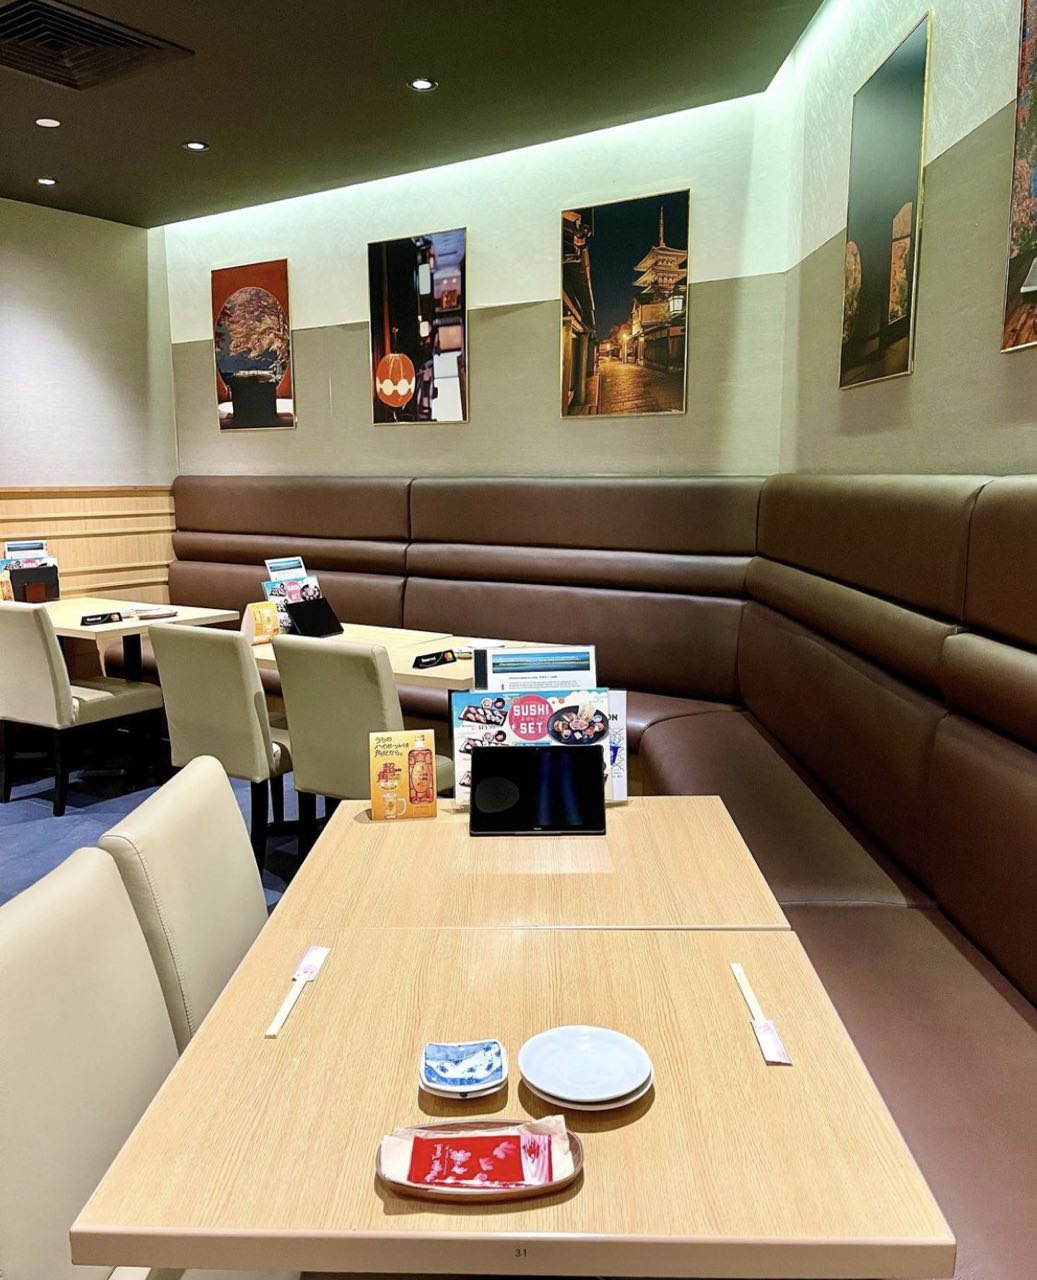 CHOJIRO'S FIRST OUTLET OUTSIDE JAPAN WITH TRADITIONAL STEAMED SUSHI – Shout